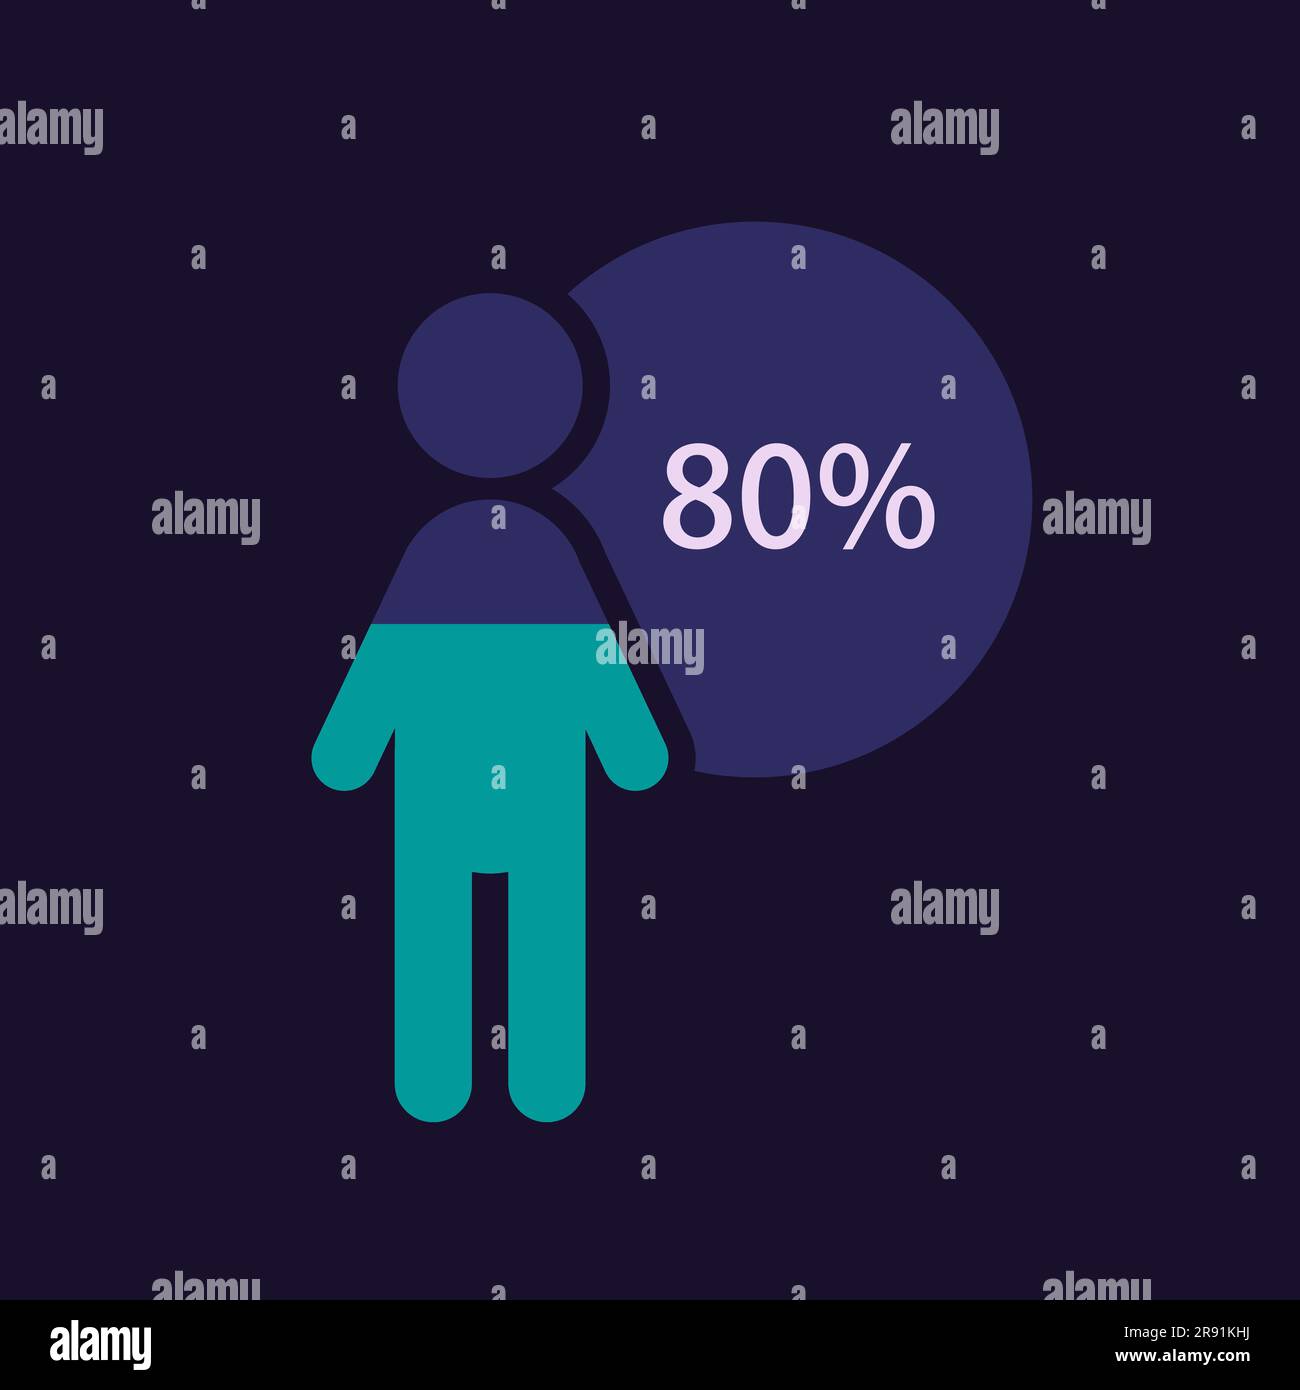 Male population infographic chart design template for dark theme